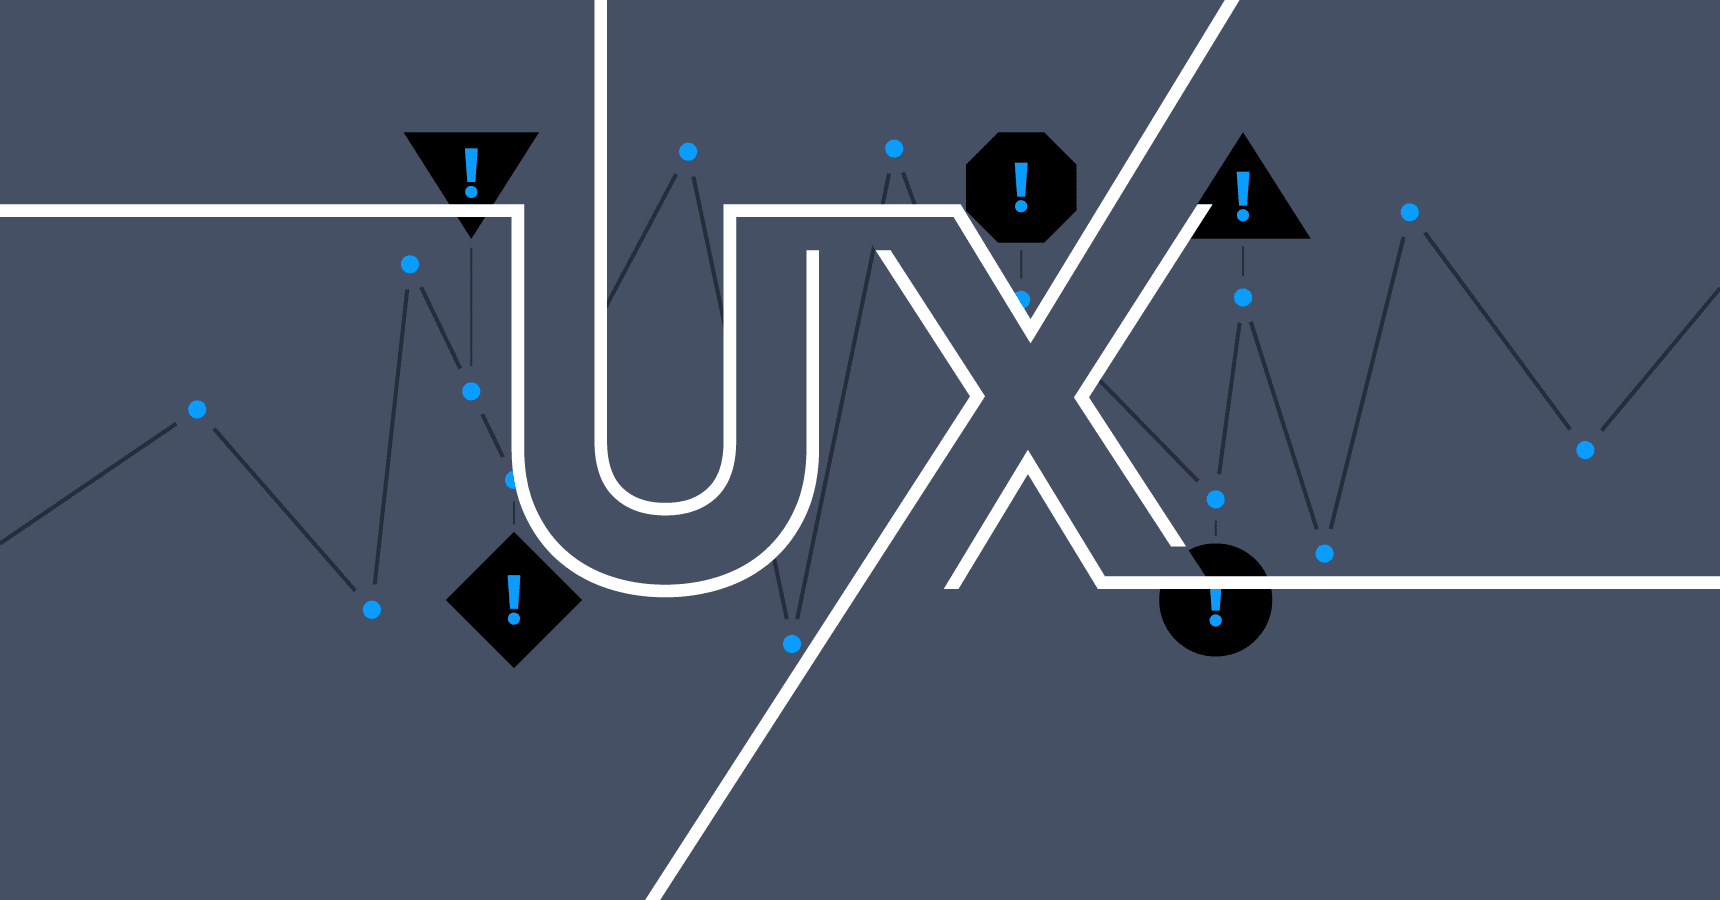 Are All Trends Worth It? The Top 5 Most Common UX Mistakes Web Designers Make